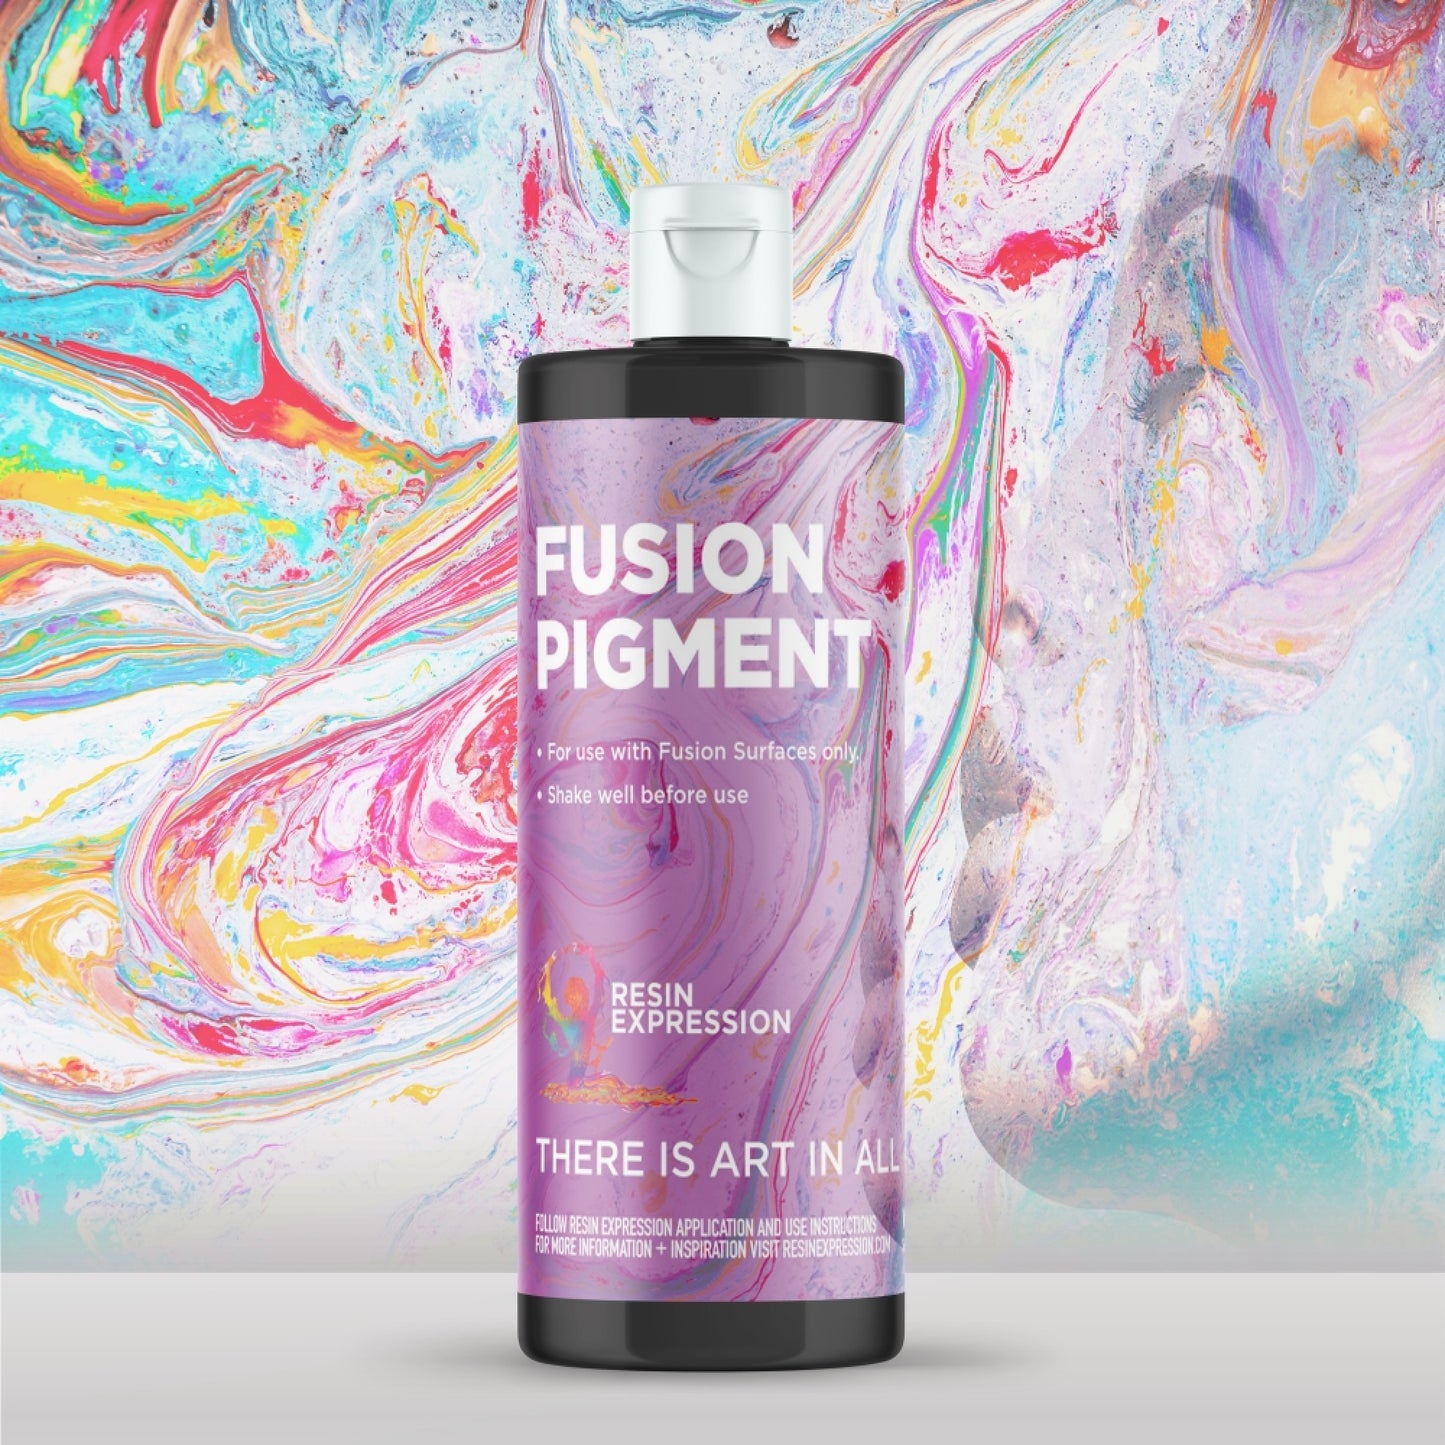 Transform Your Kitchen with Ease - Resin Expression's Fusion Surface System